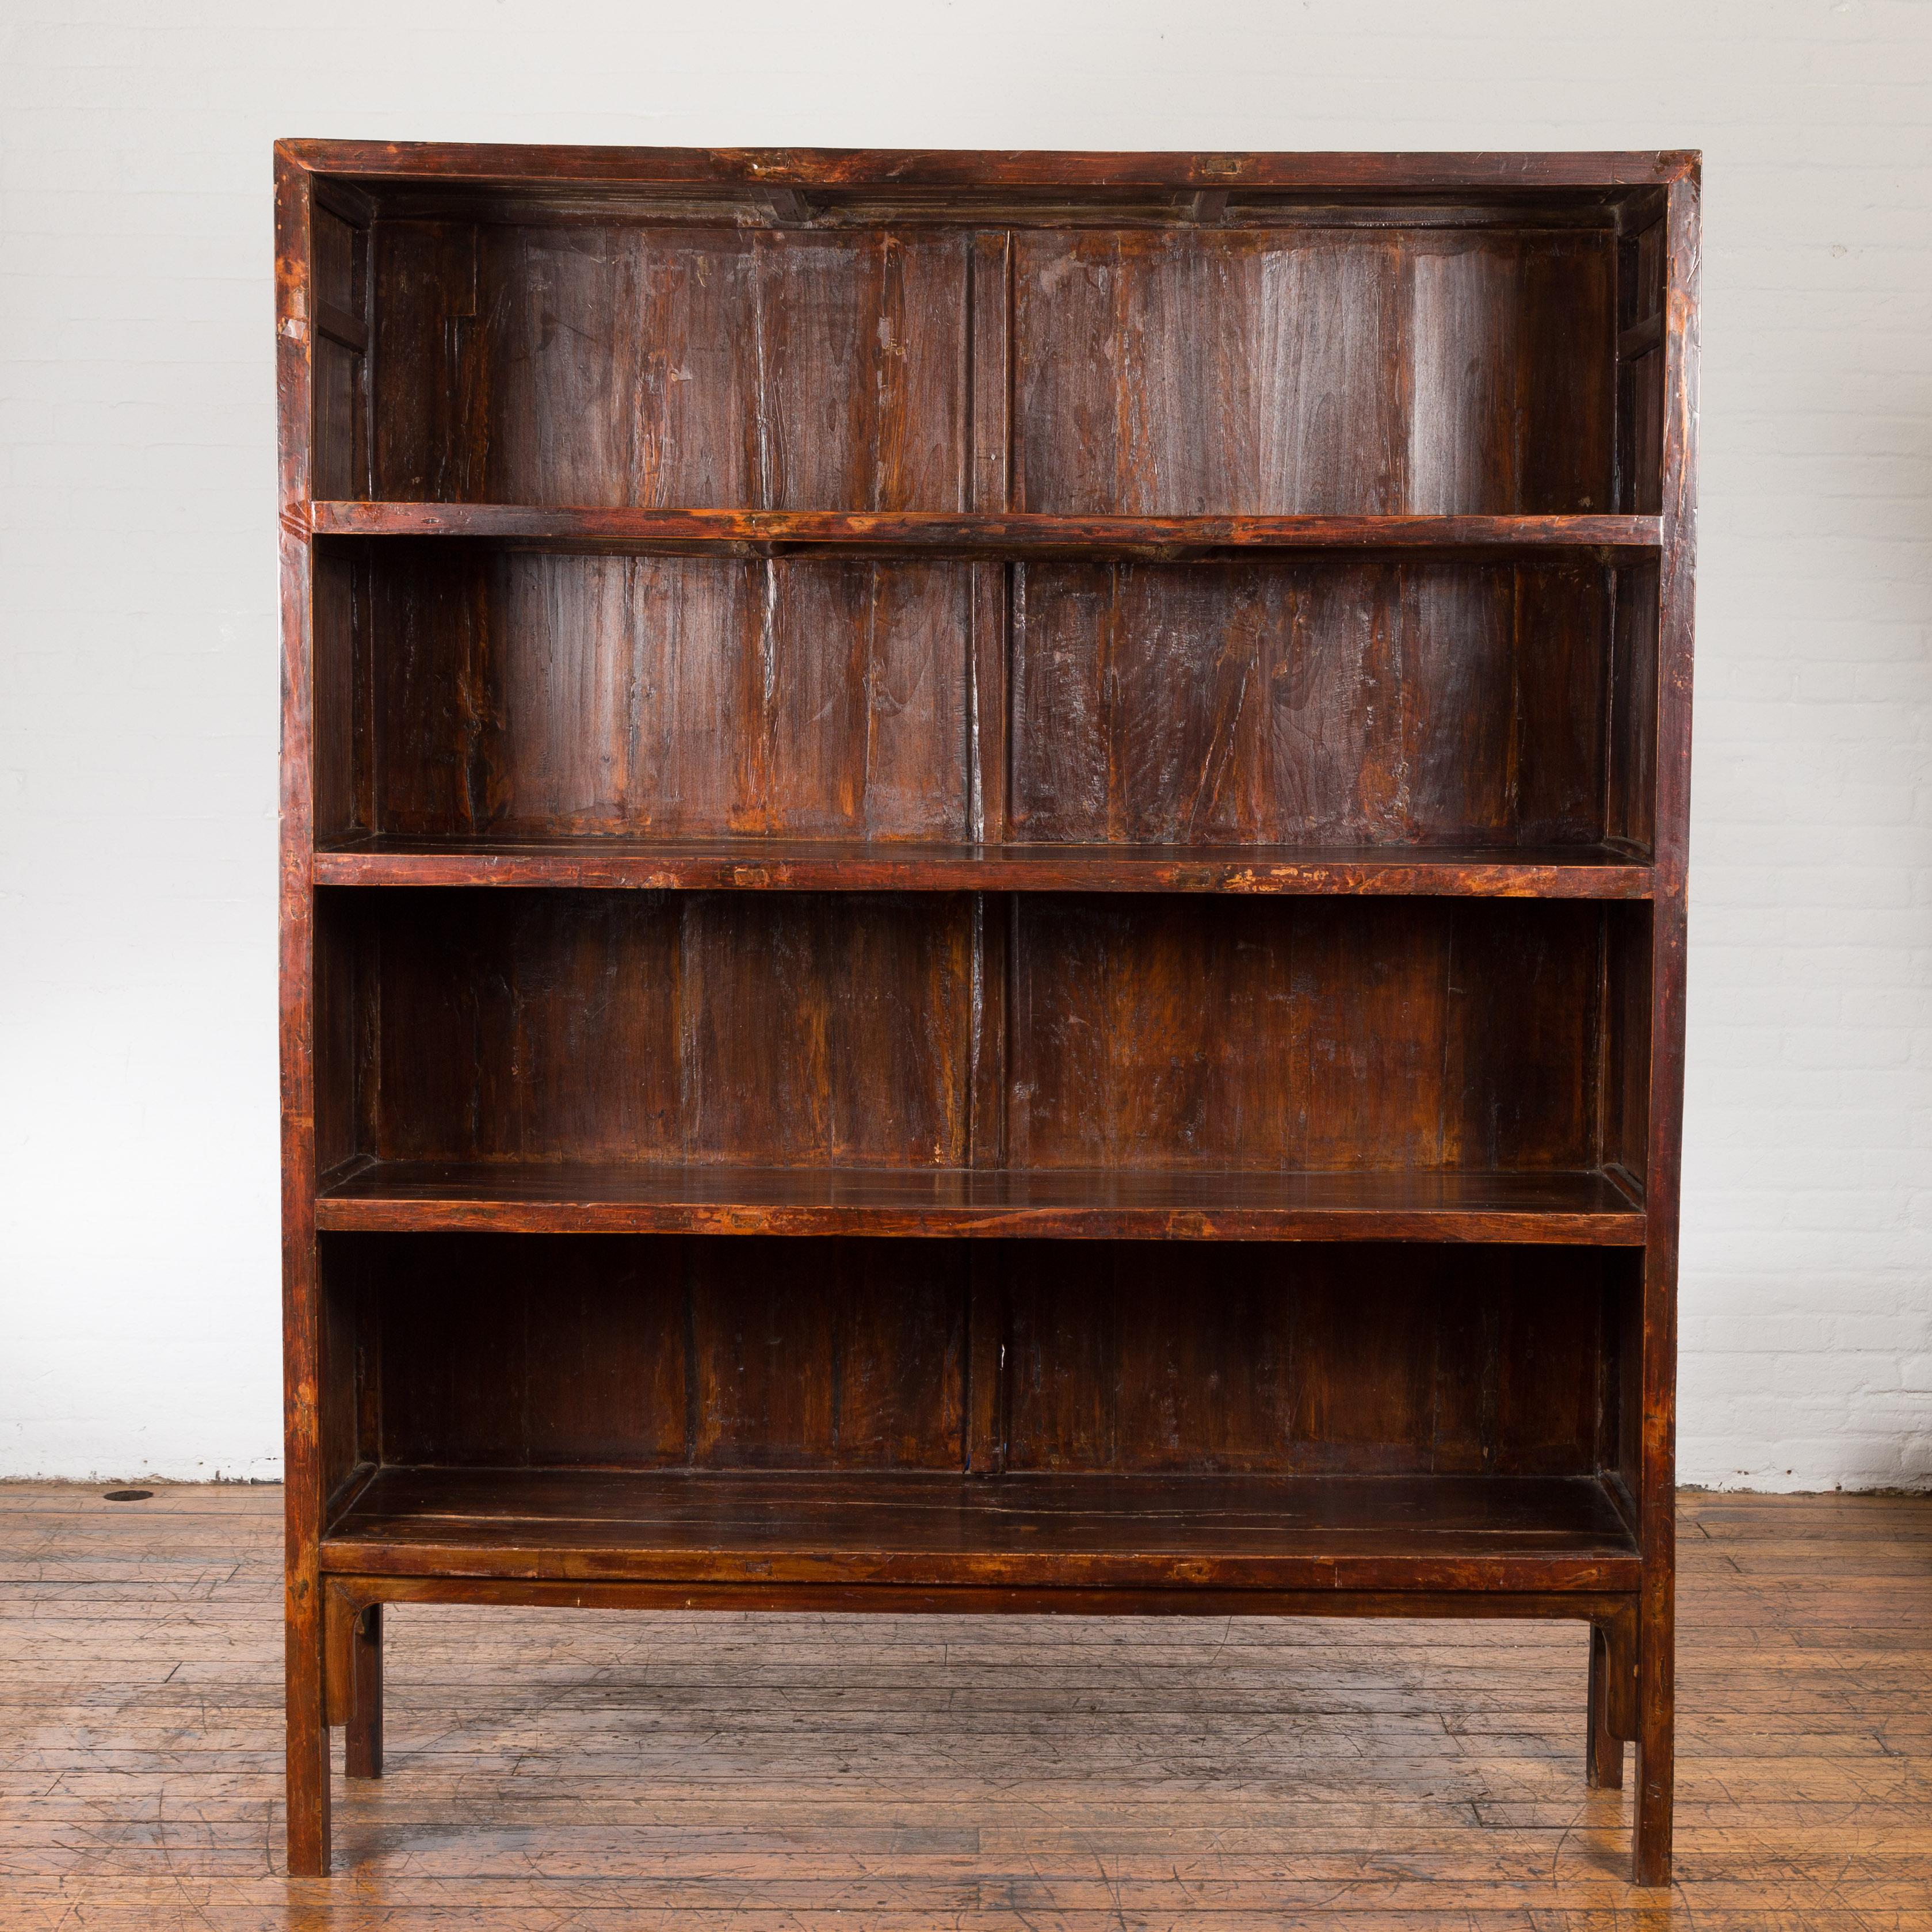 Wood Chinese Qing Dynasty 19th Century Bookcase with Four Shelves and Dark Patina For Sale